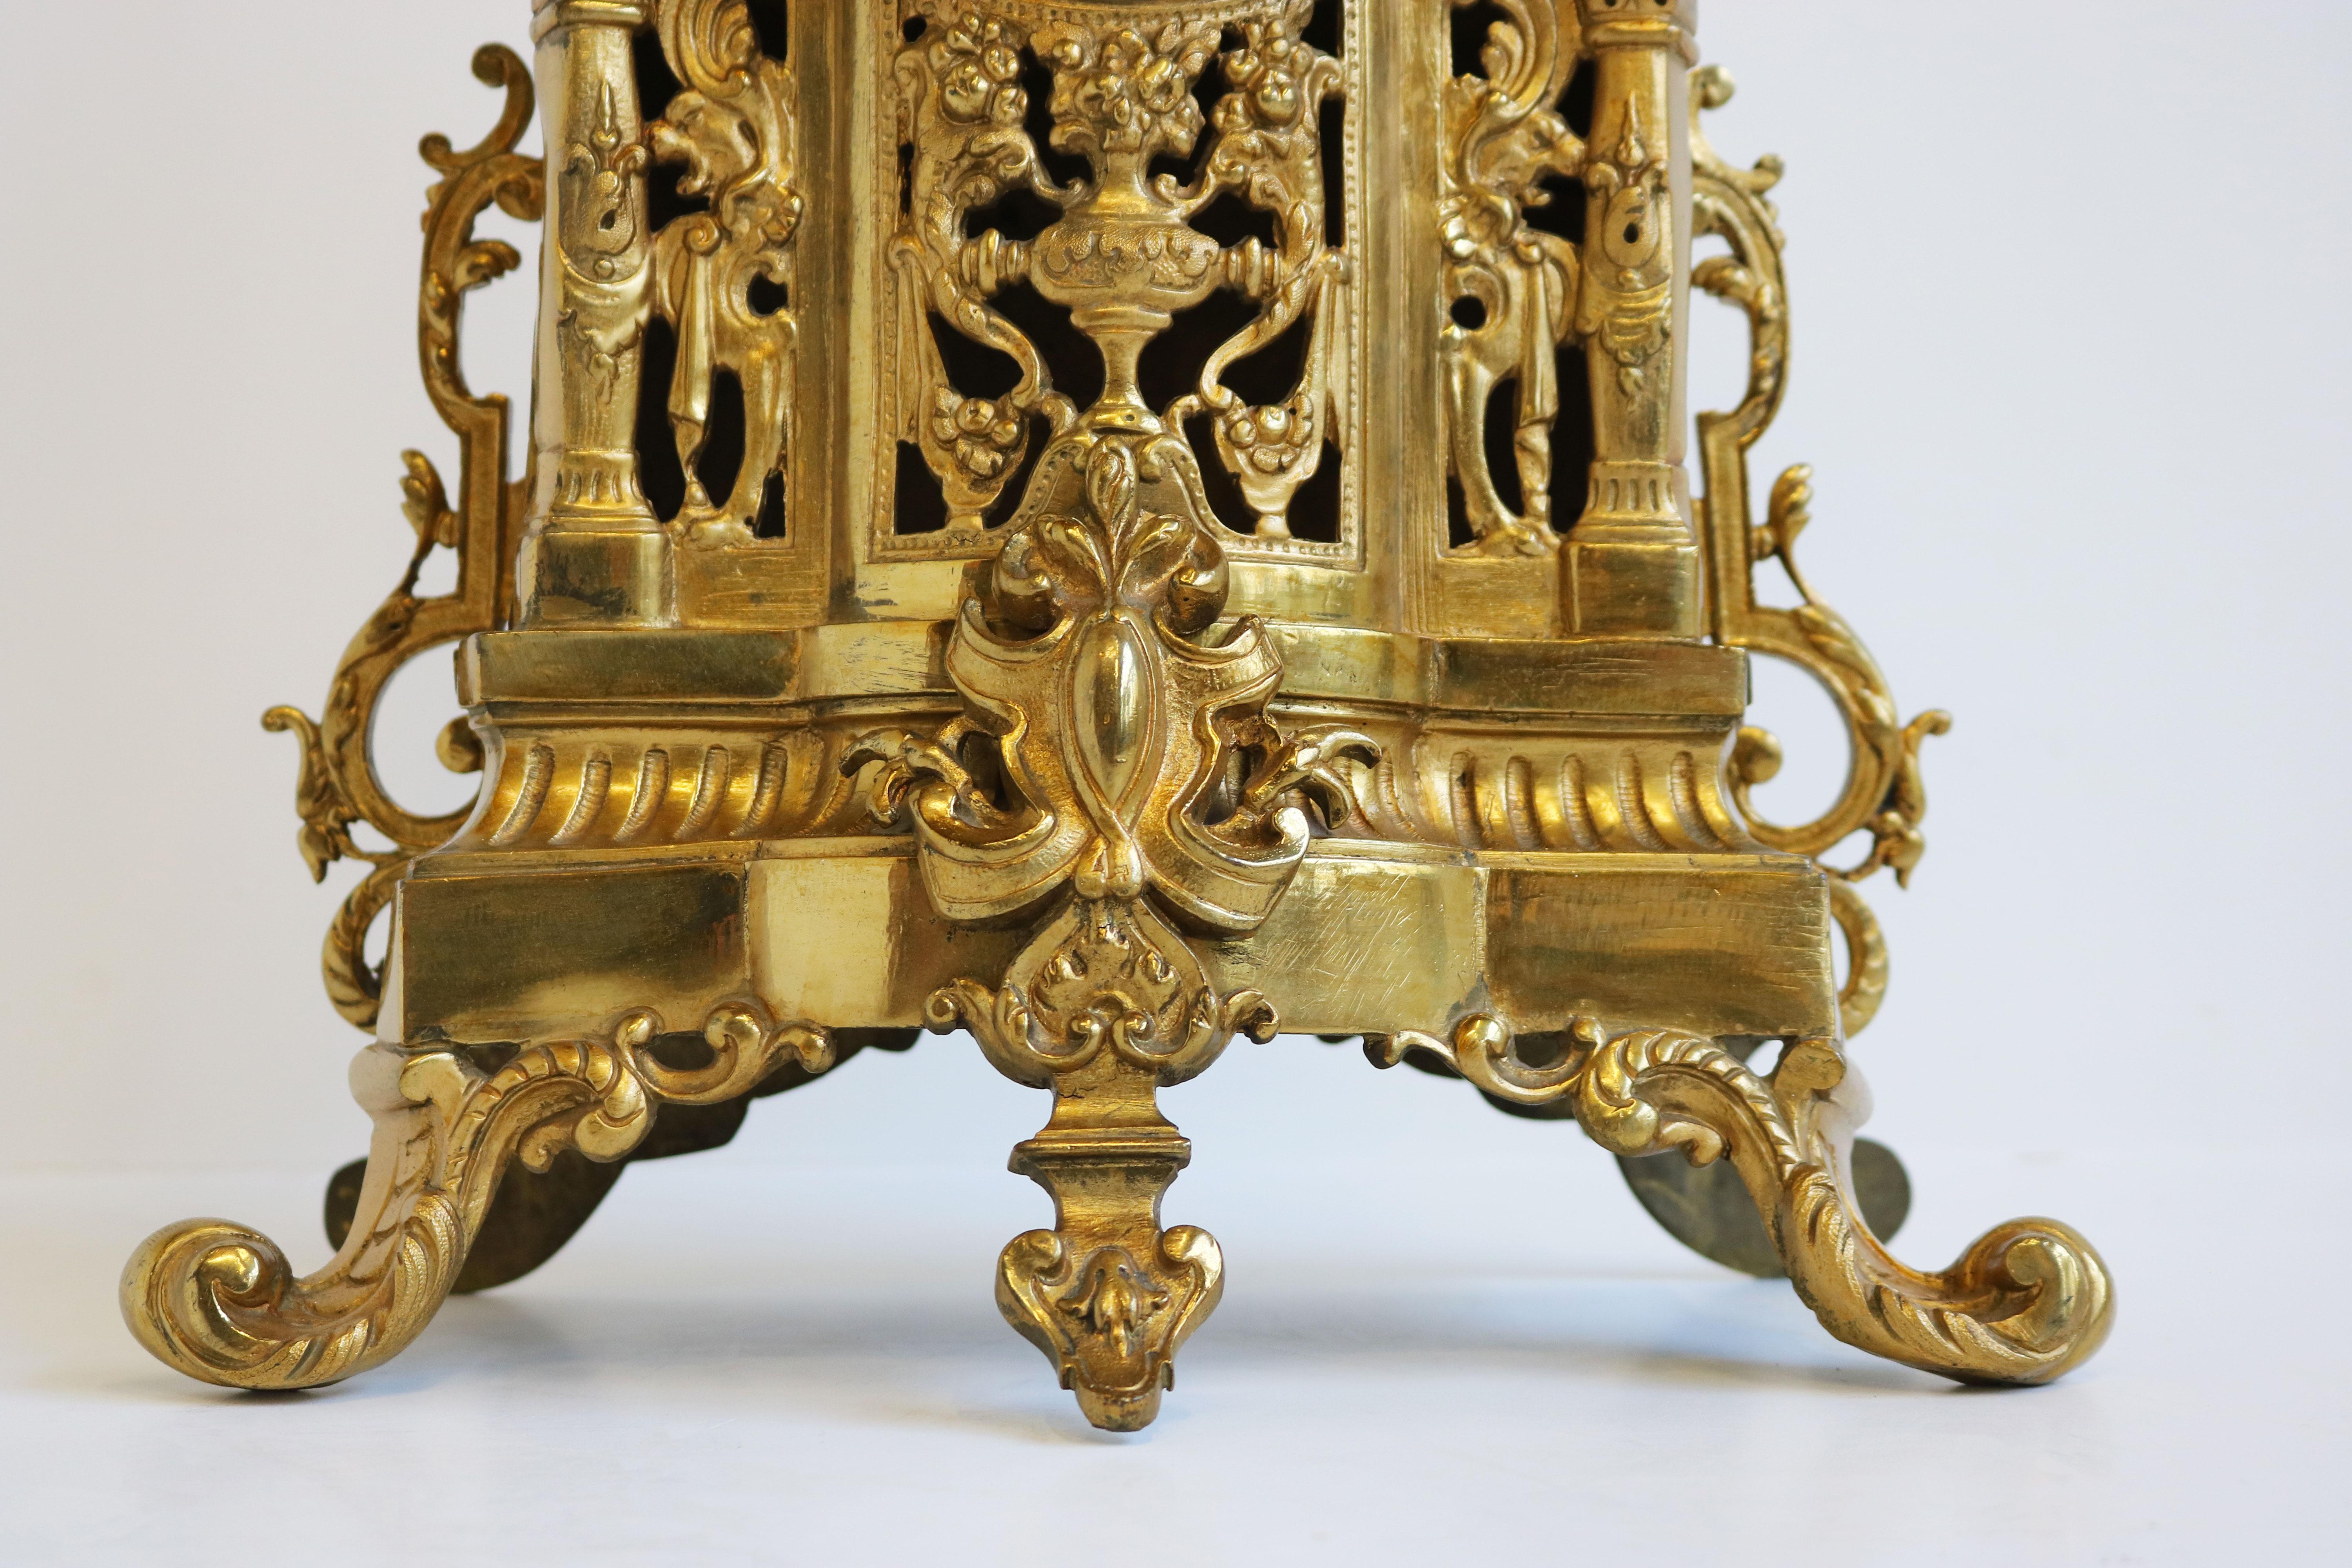 Huge Antique French Gilt Bronze Classical Clock Set 19th century Acanthus leaves For Sale 1